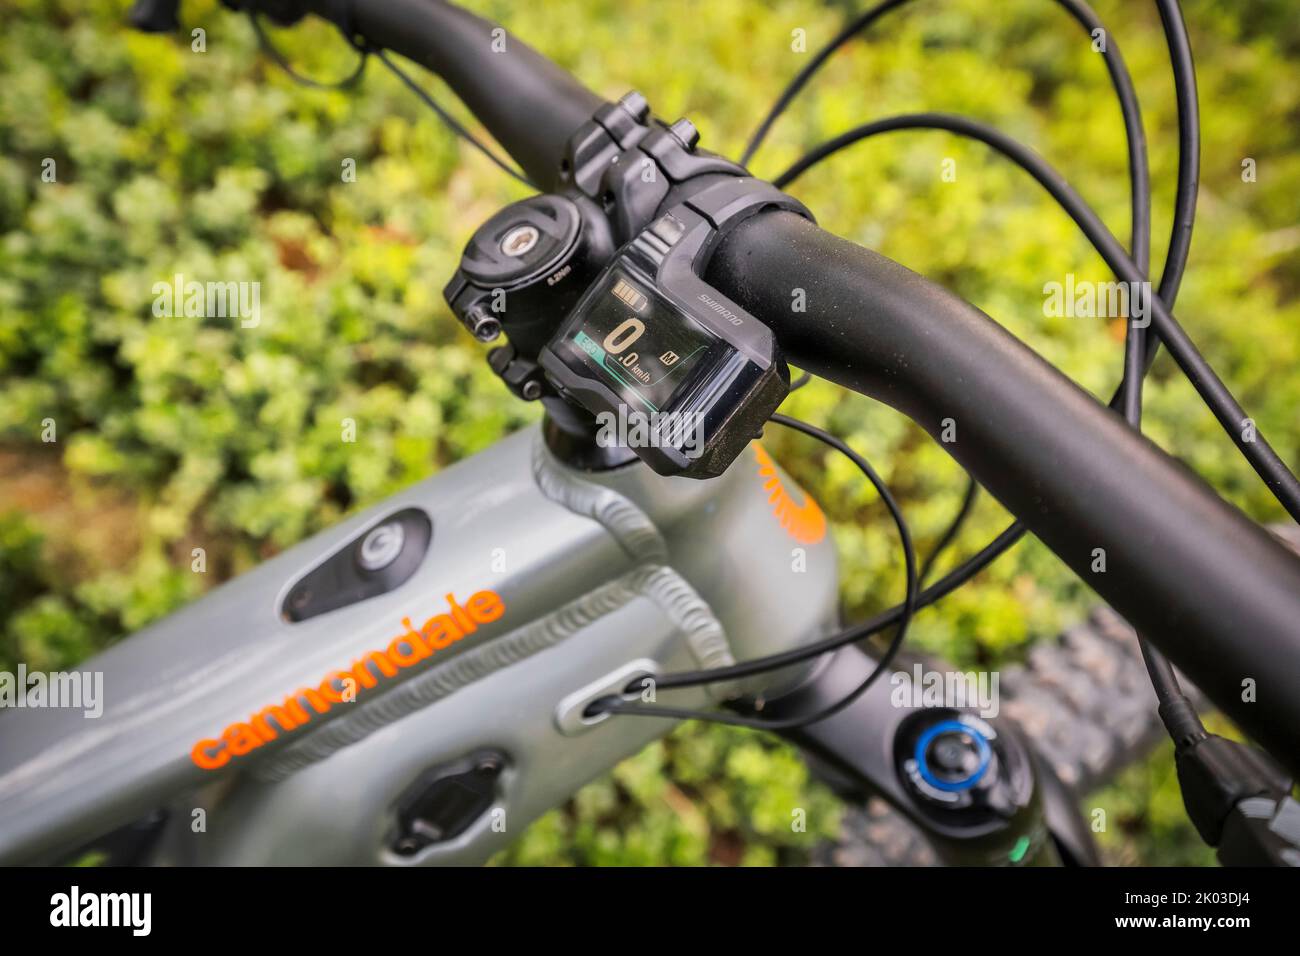 Italy, Dolomites, detail of a modern e-bike / e-mtb in the forest, green mobility Stock Photo